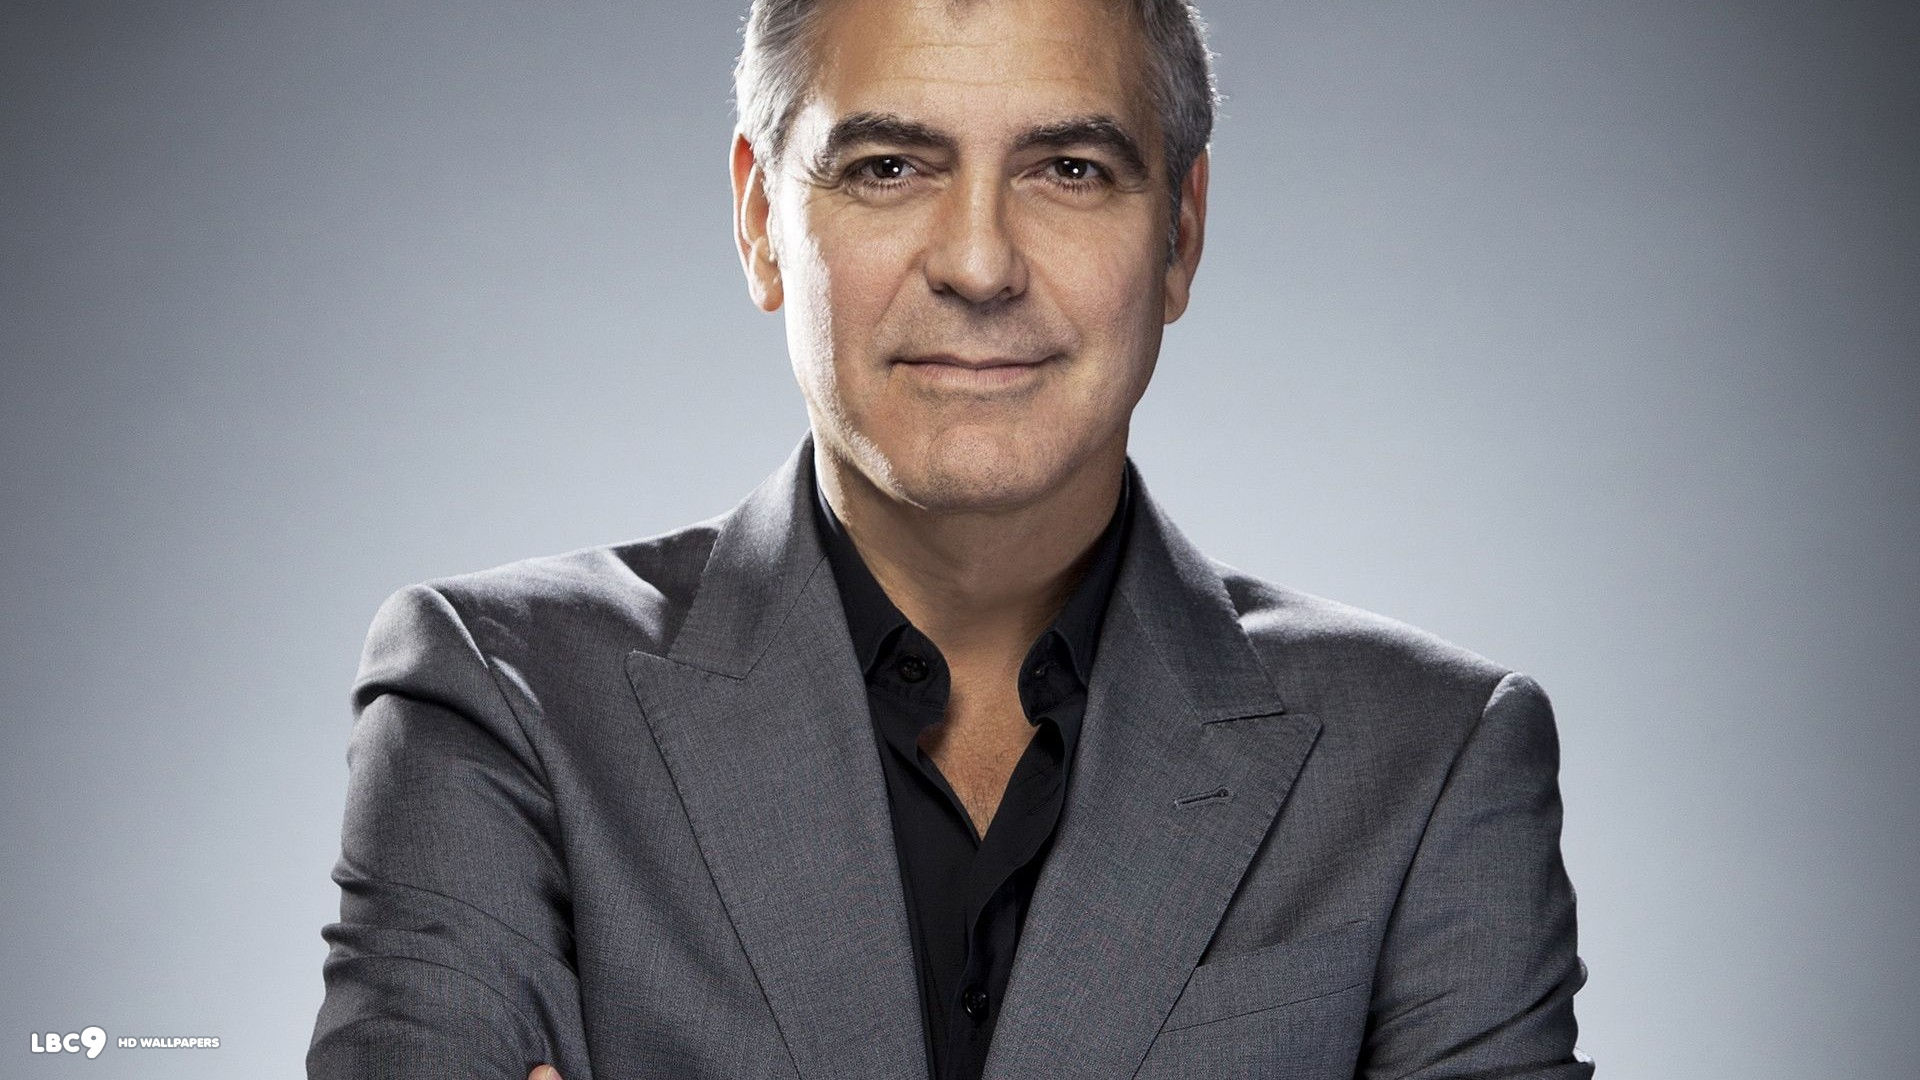 George Clooney Wallpapers   Top Free George Clooney Backgrounds